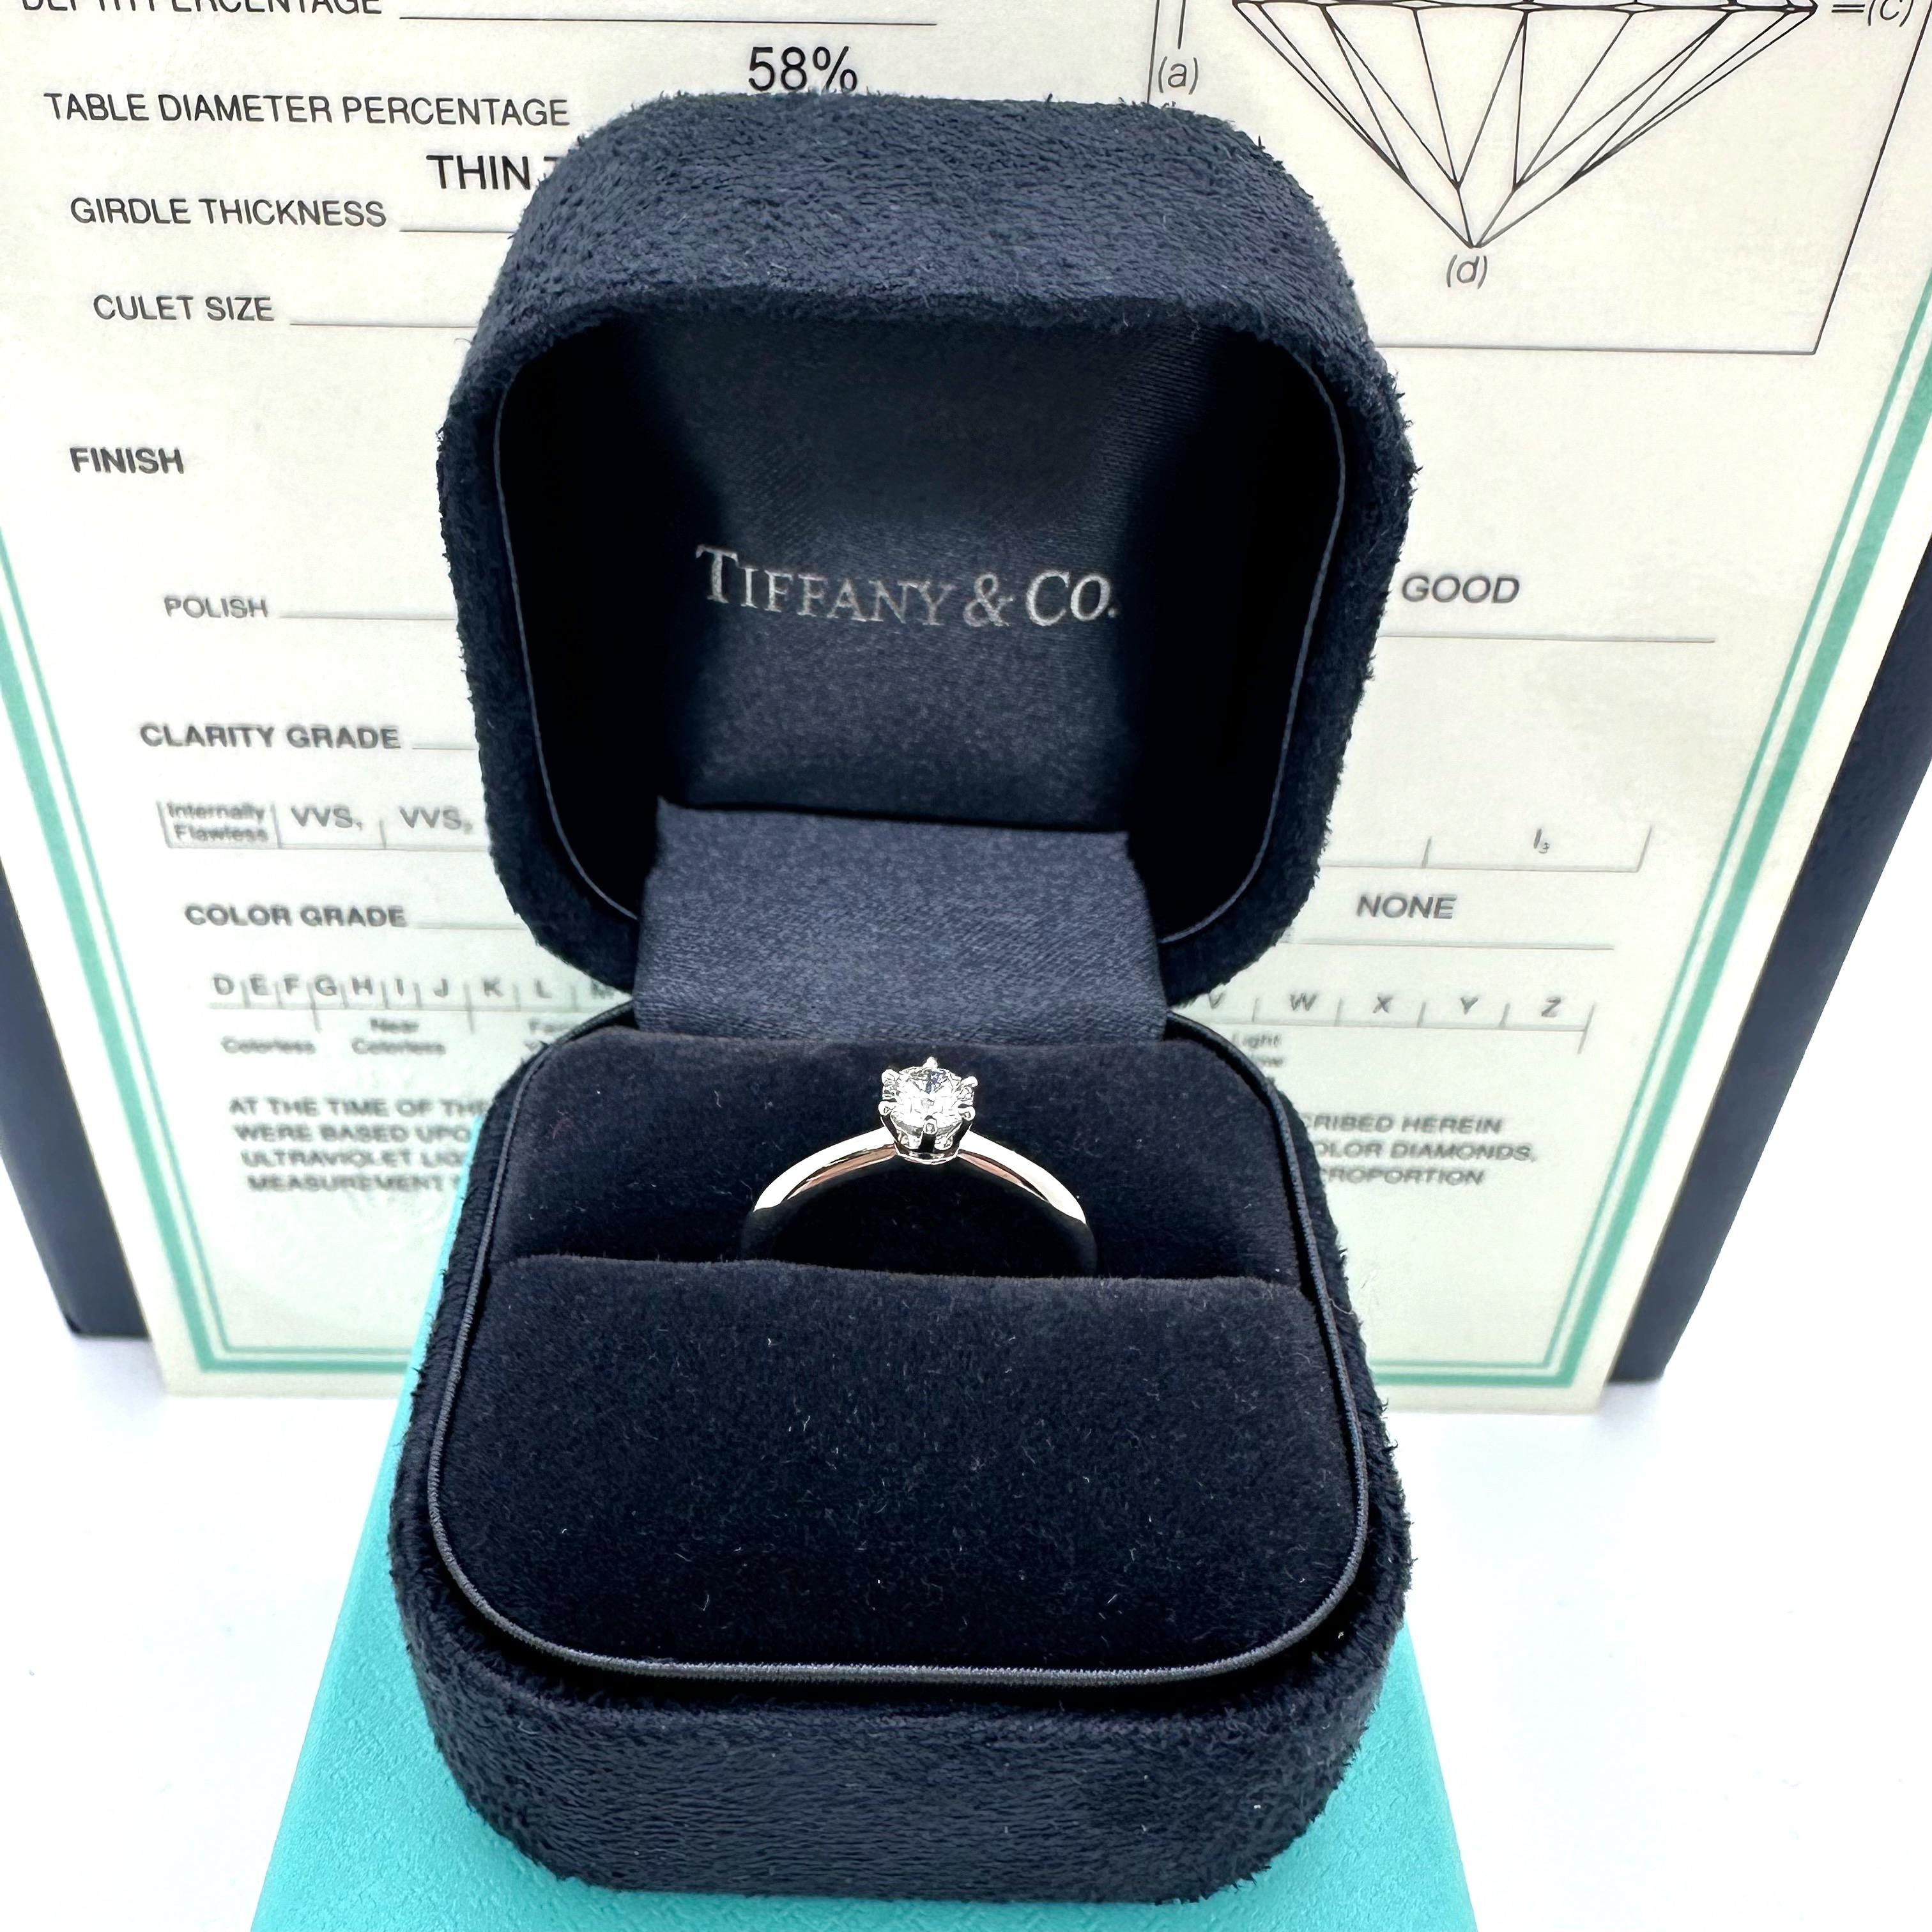 Tiffany & Co Round Brilliant Diamond 0.33 ct H VS1 Solitair Plat Engagement Ring For Sale 2